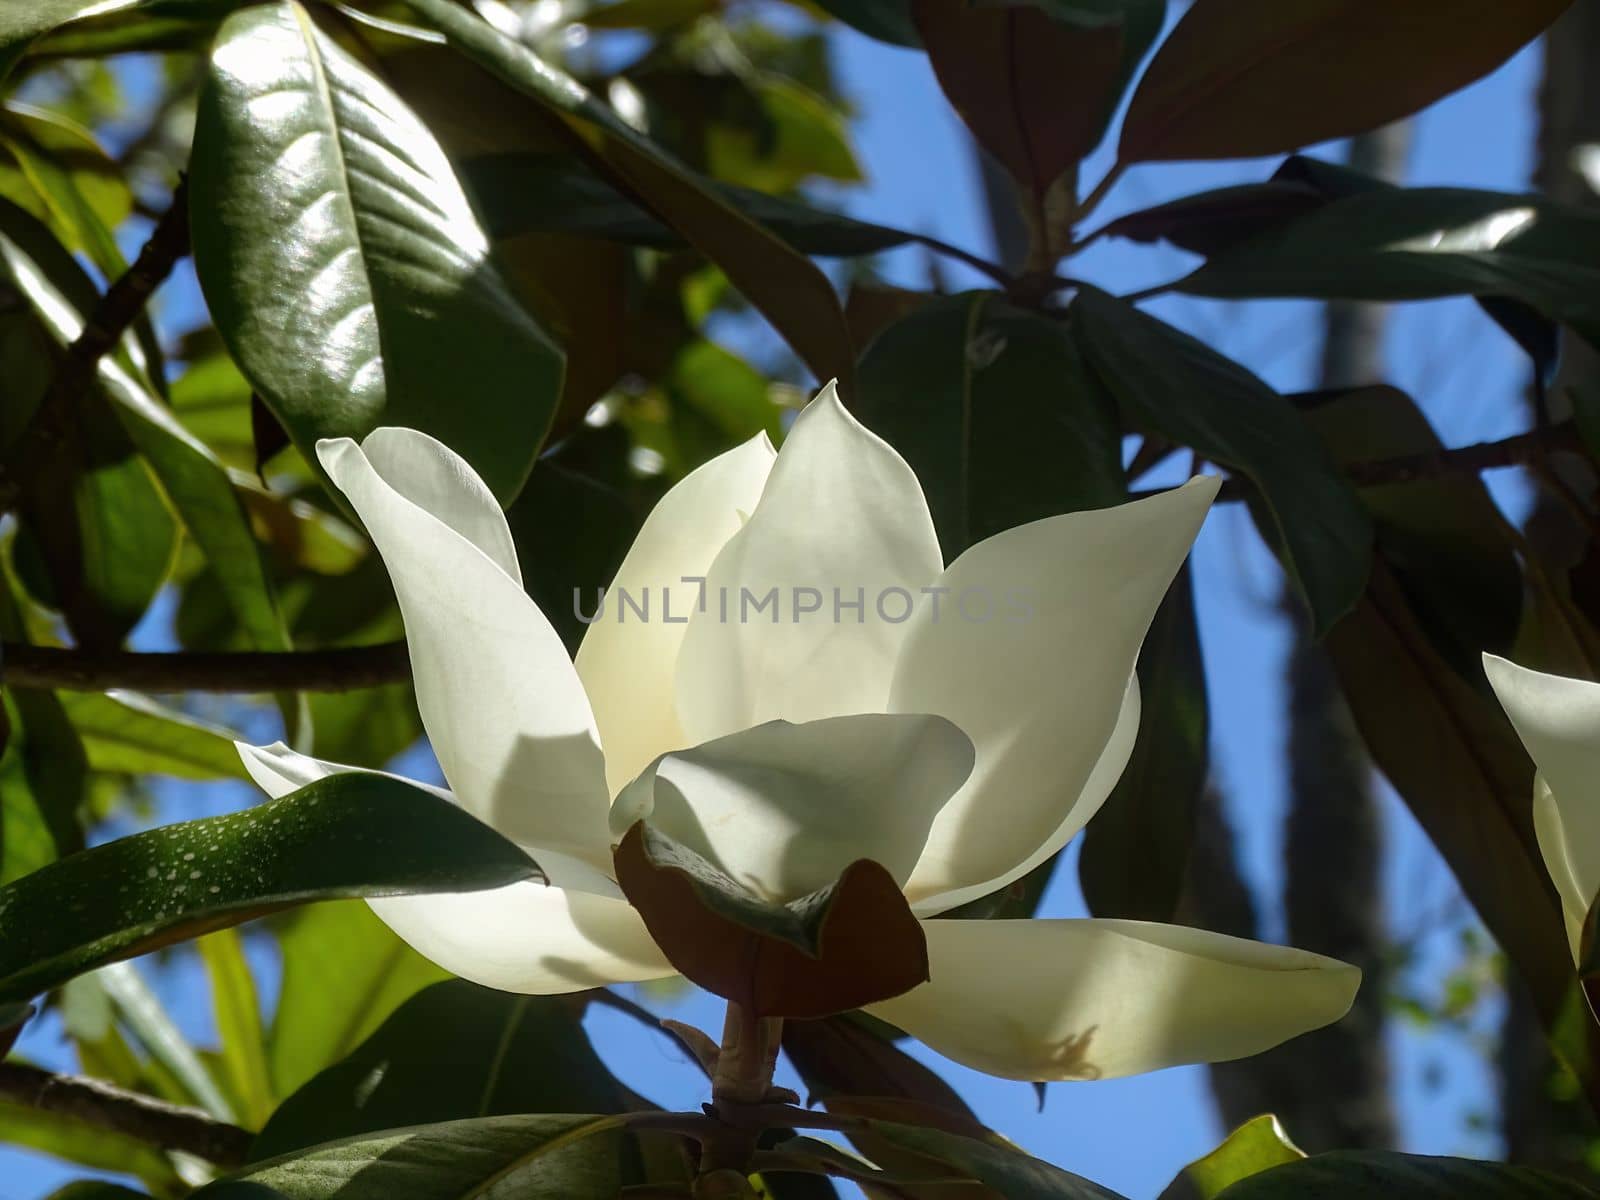 A huge white magnolia flower on a branch close up